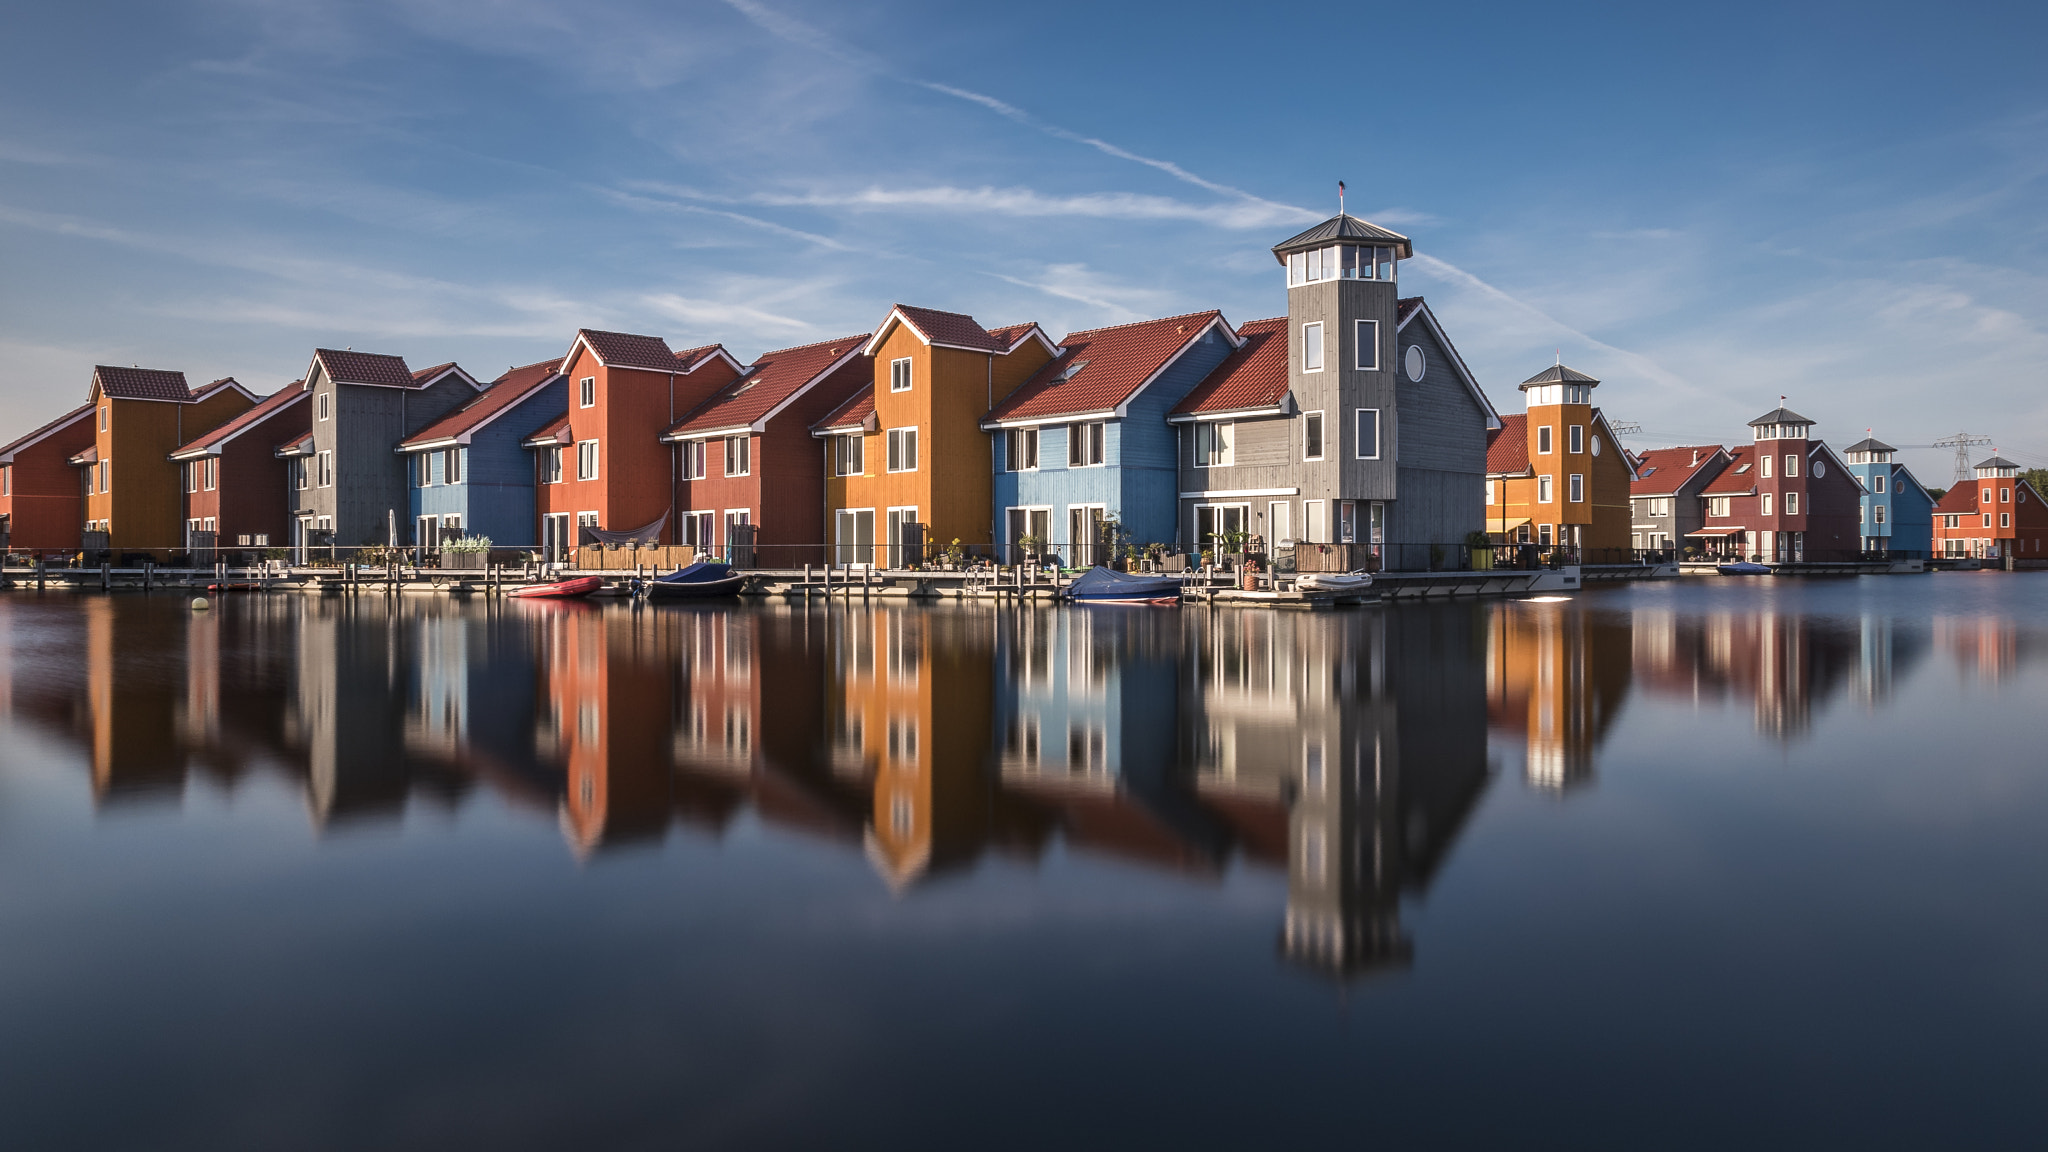 Nikon D5500 + Tamron SP AF 10-24mm F3.5-4.5 Di II LD Aspherical (IF) sample photo. Reitdiephaven photography